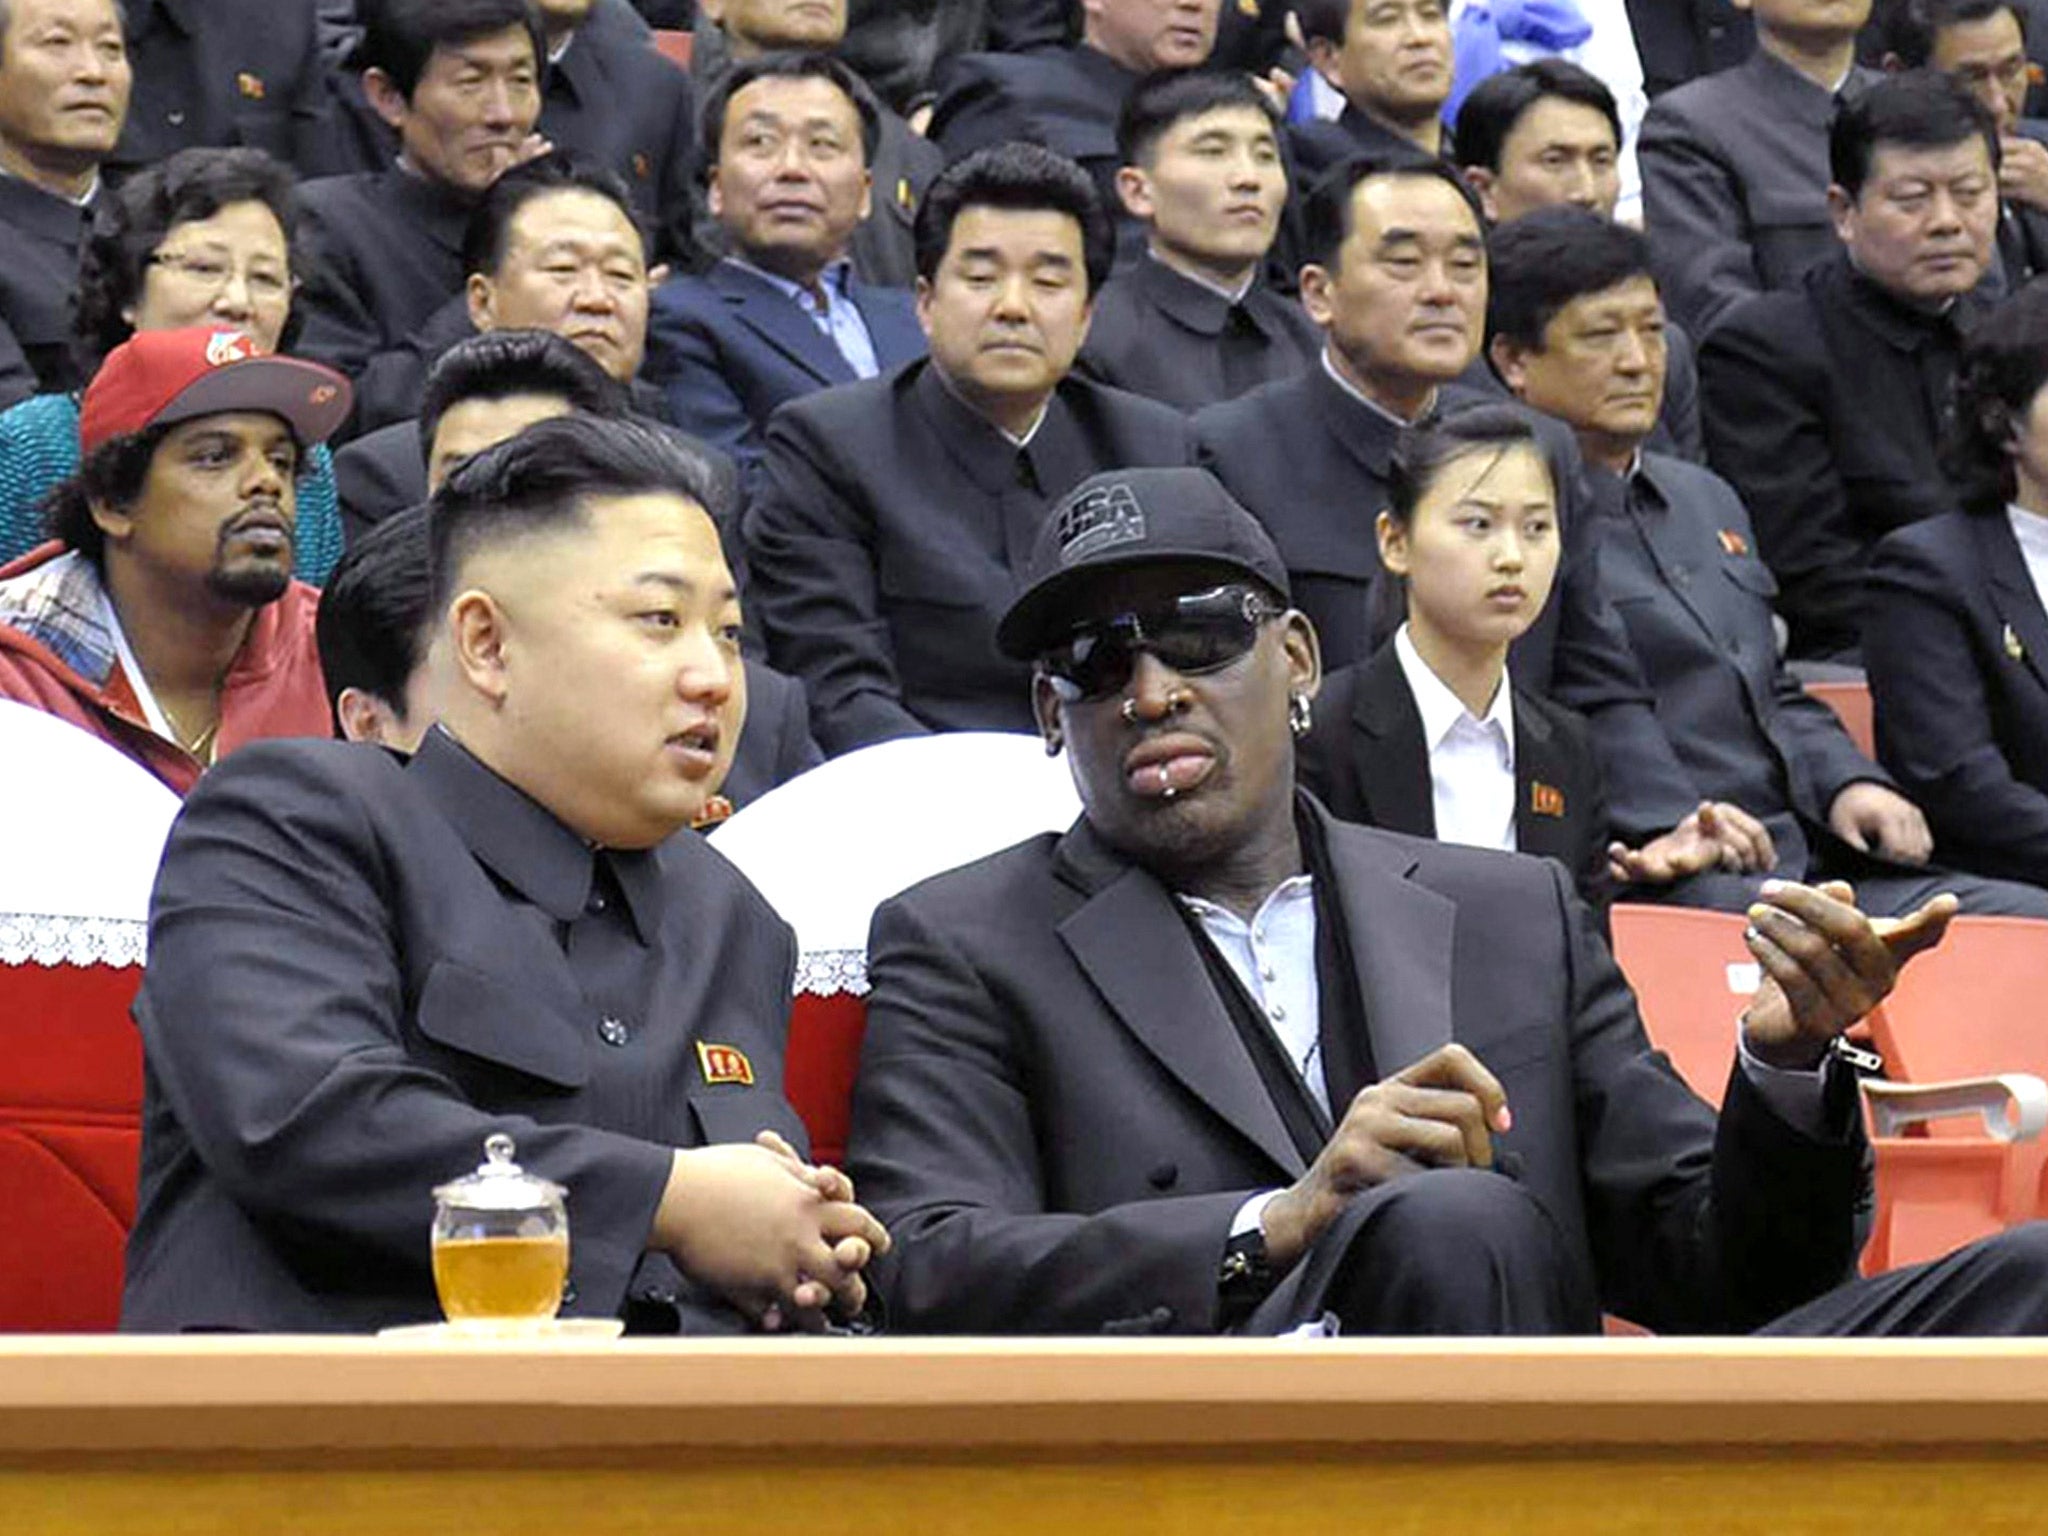 Former NBA star Dennis Rodman attended a basketball game with Kim Jong-Un in Pyongyang, earlier this year